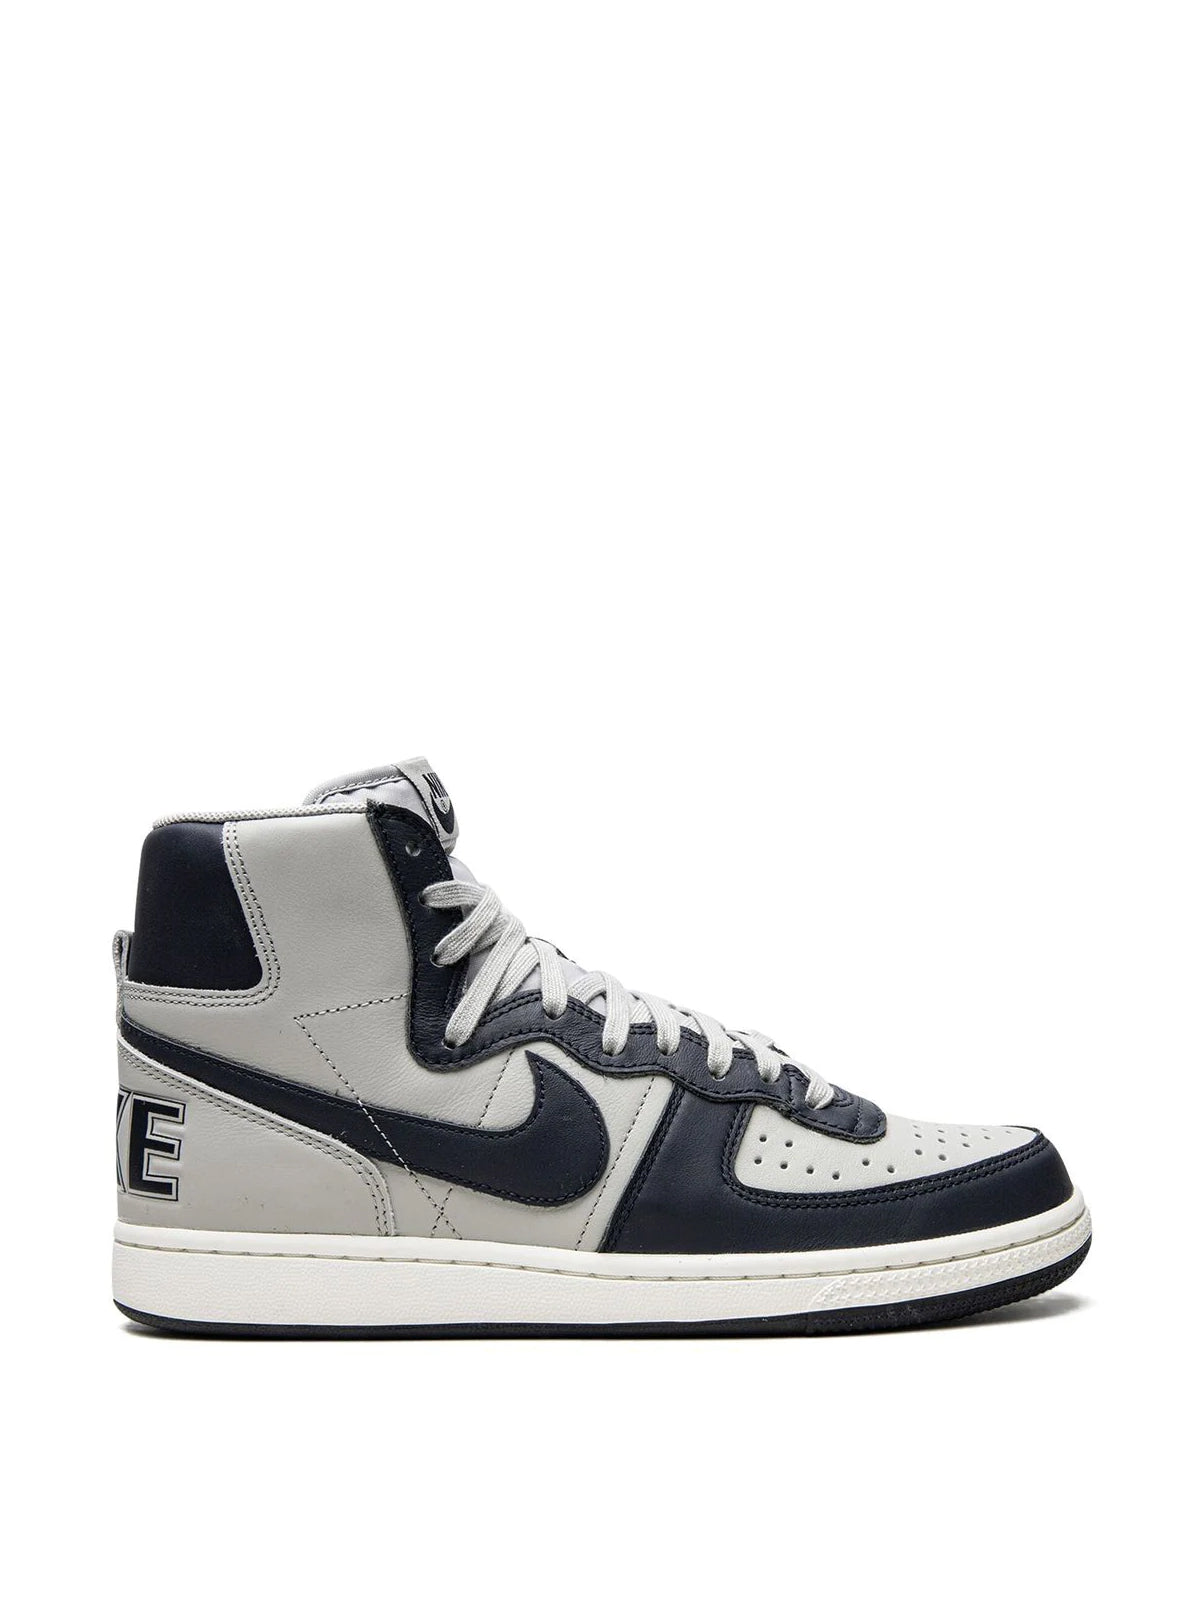 Nike-OUTLET-SALE-Terminator High Sneakers-ARCHIVIST